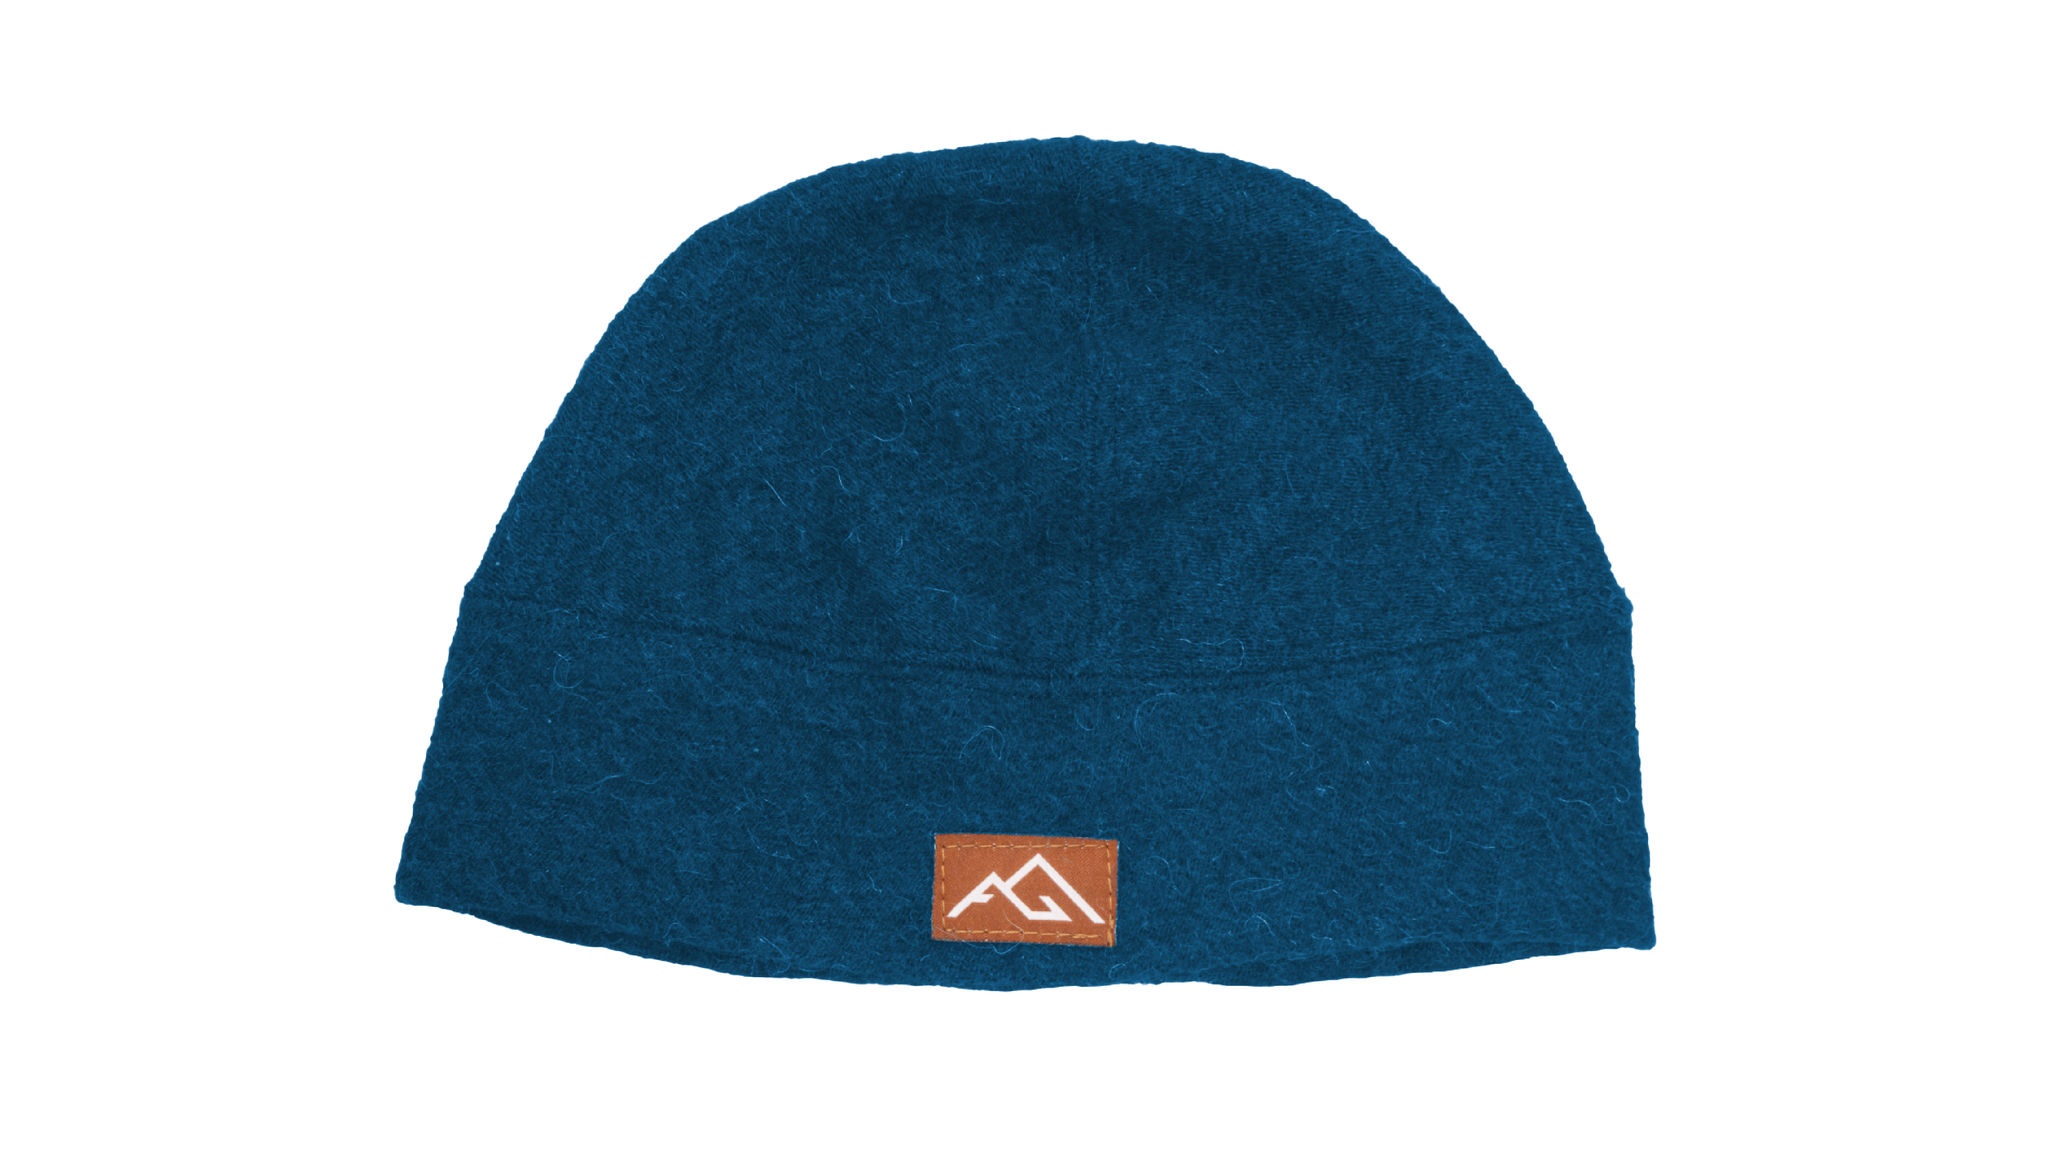 New Steamboat company selling locally-made alpaca fleece hats just